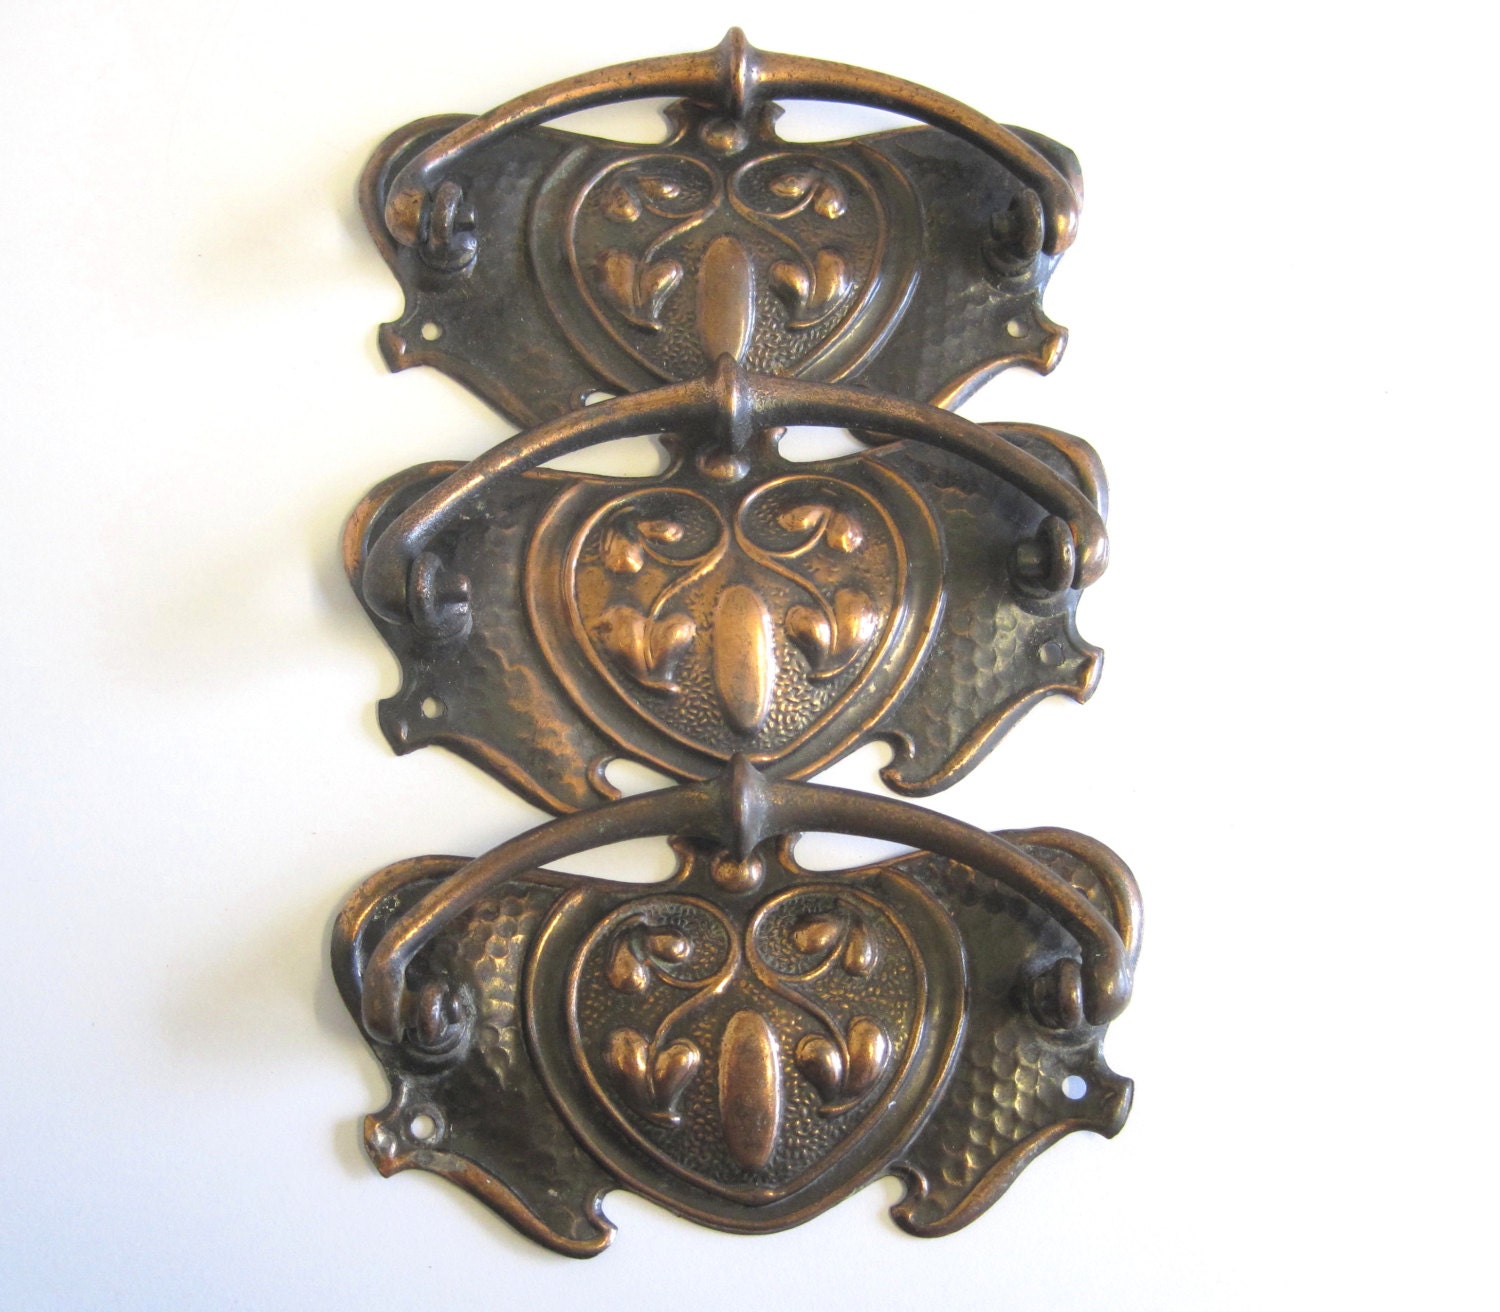 3 Vintage Art Nouveau Drawer Pulls with Copper Highlights